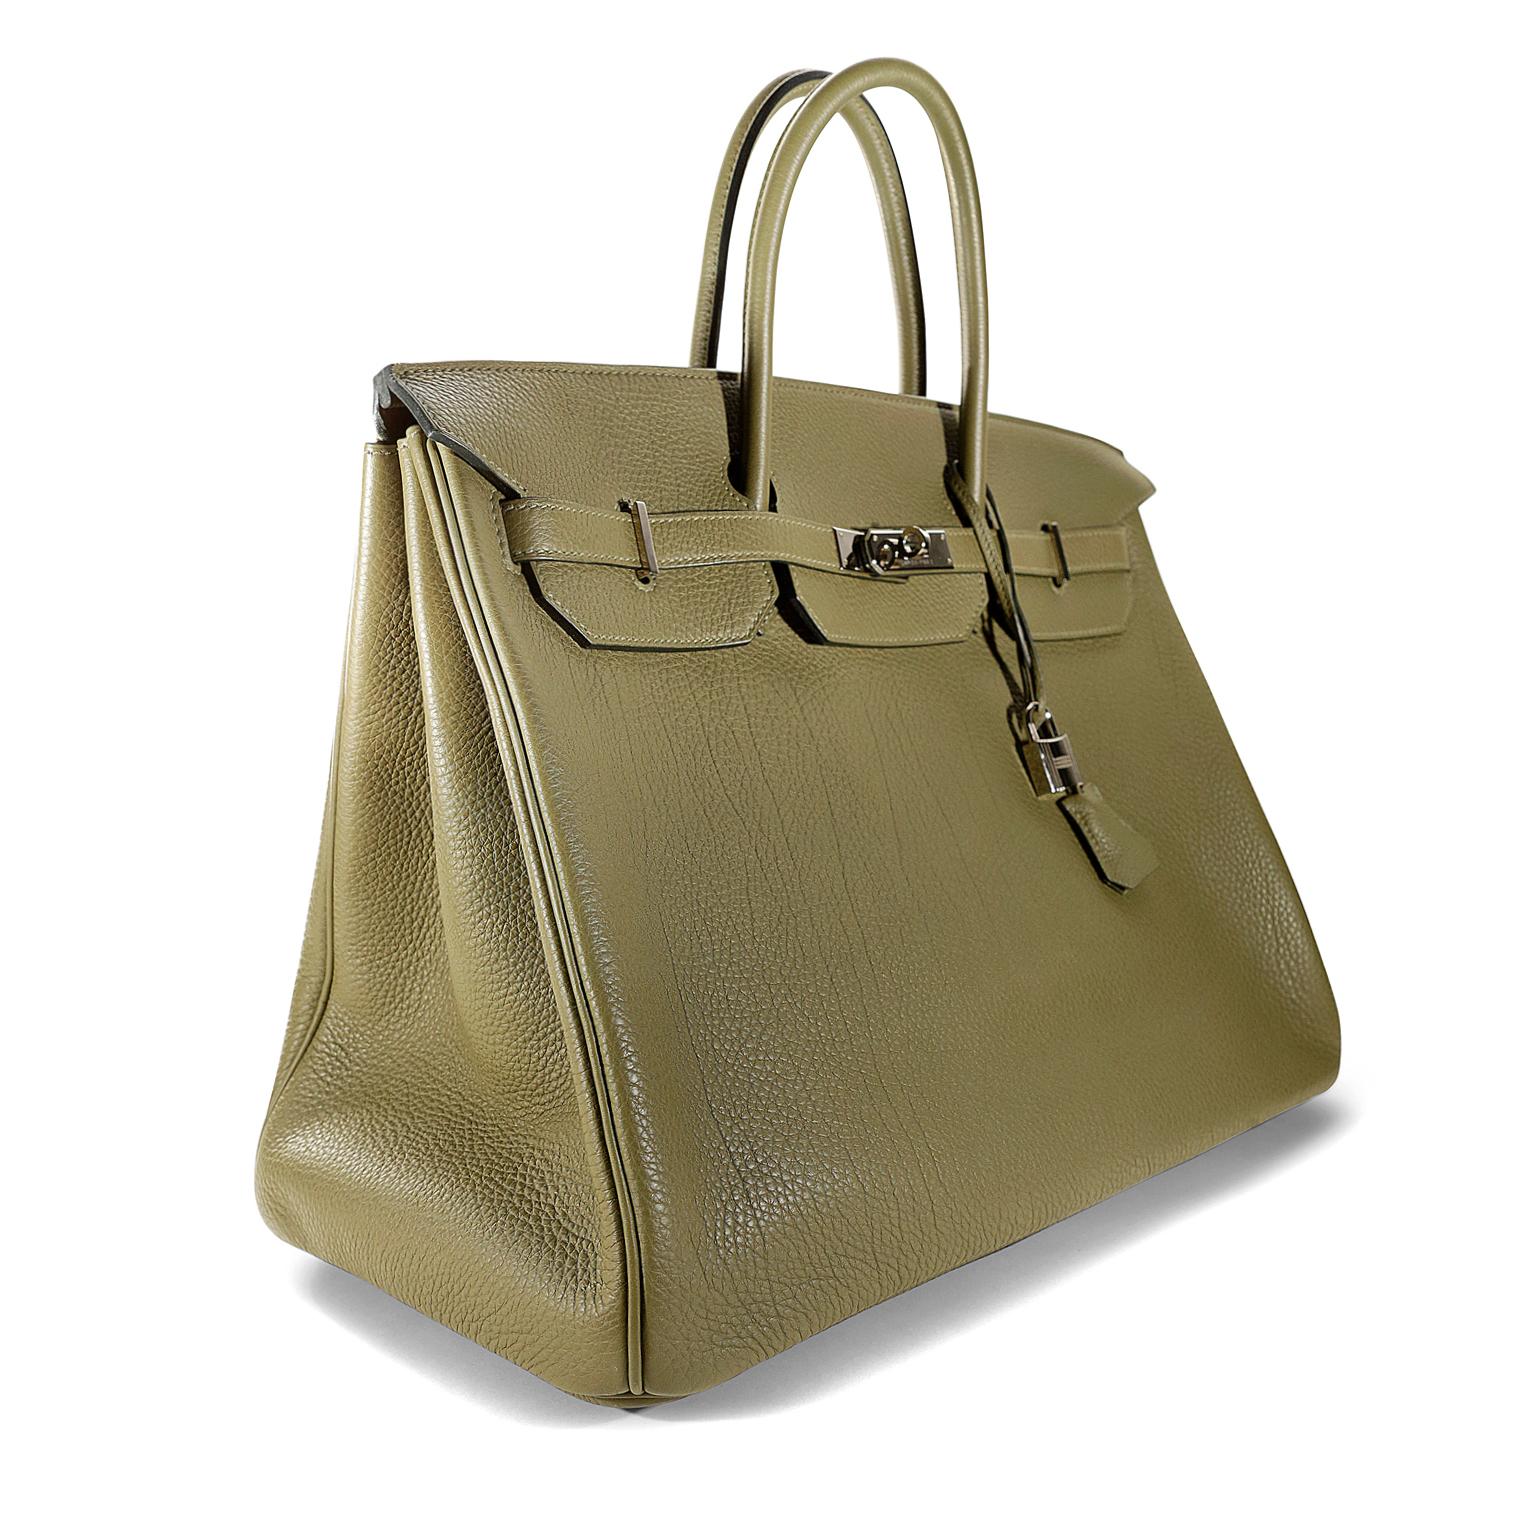 Hermès Vert Veronese Togo 40 cm Birkin- Excellent Plus Condition
Hand stitched by skilled craftsmen, wait lists of a year or more are not uncommon for the Hermès Birkin. They are considered the ultimate in luxury fashion. Palladium hardware is the